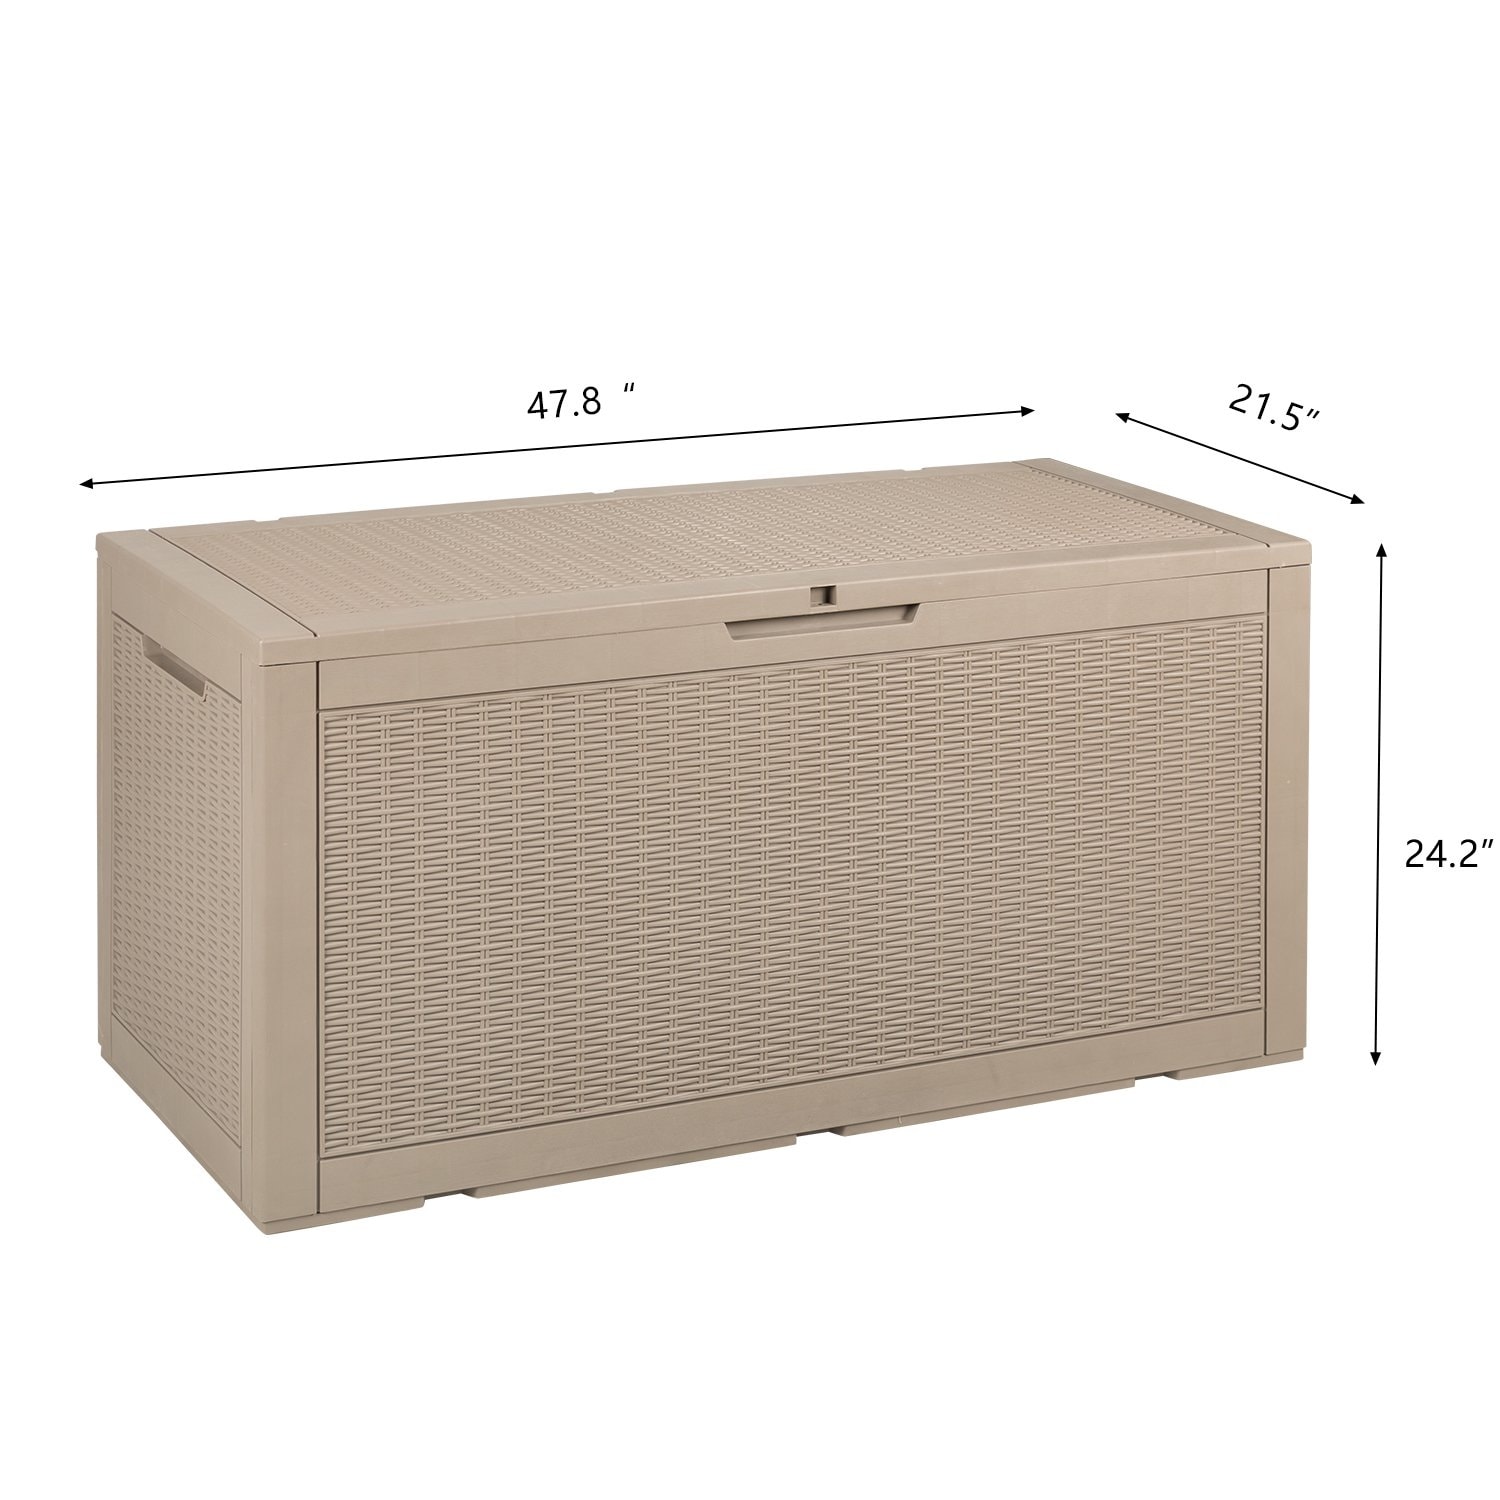 https://ak1.ostkcdn.com/images/products/is/images/direct/dfba2dd6c74fe585d457688ef89ffcc25d47ab30/Walnew-120-Gallon-Patio-Storage-Box-All-Weather-Plastic-Deck-Box.jpg